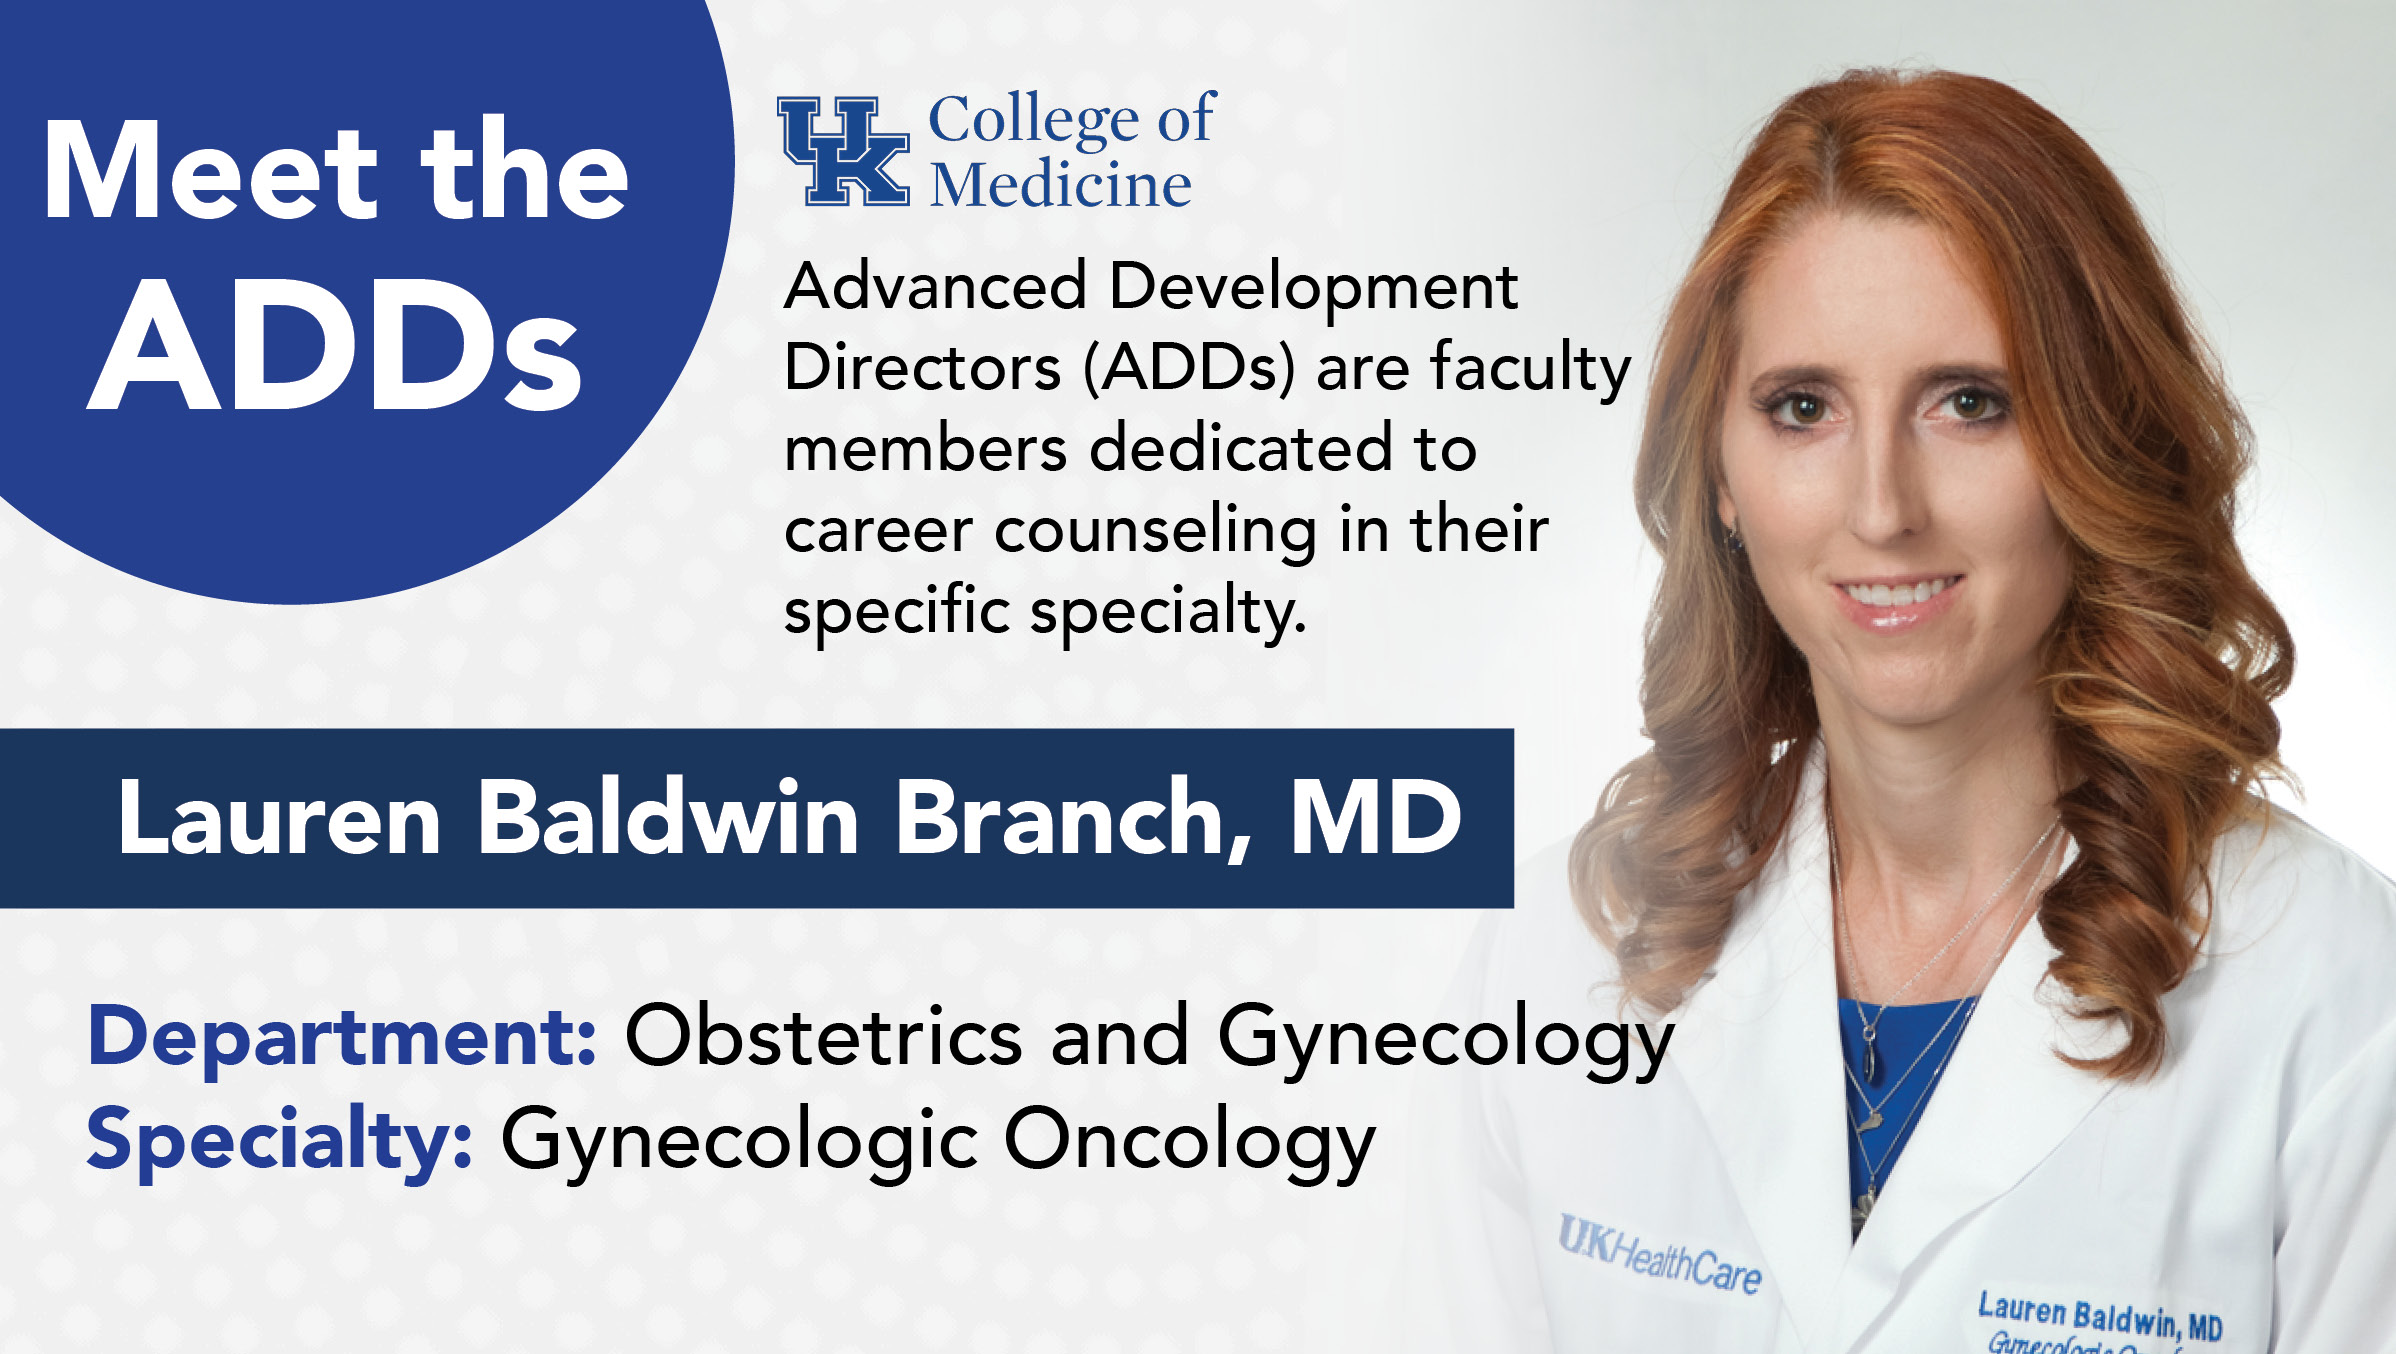 meet the adds spotlight or Dr. lauren branch, who specializes in obstetrics and gynecology